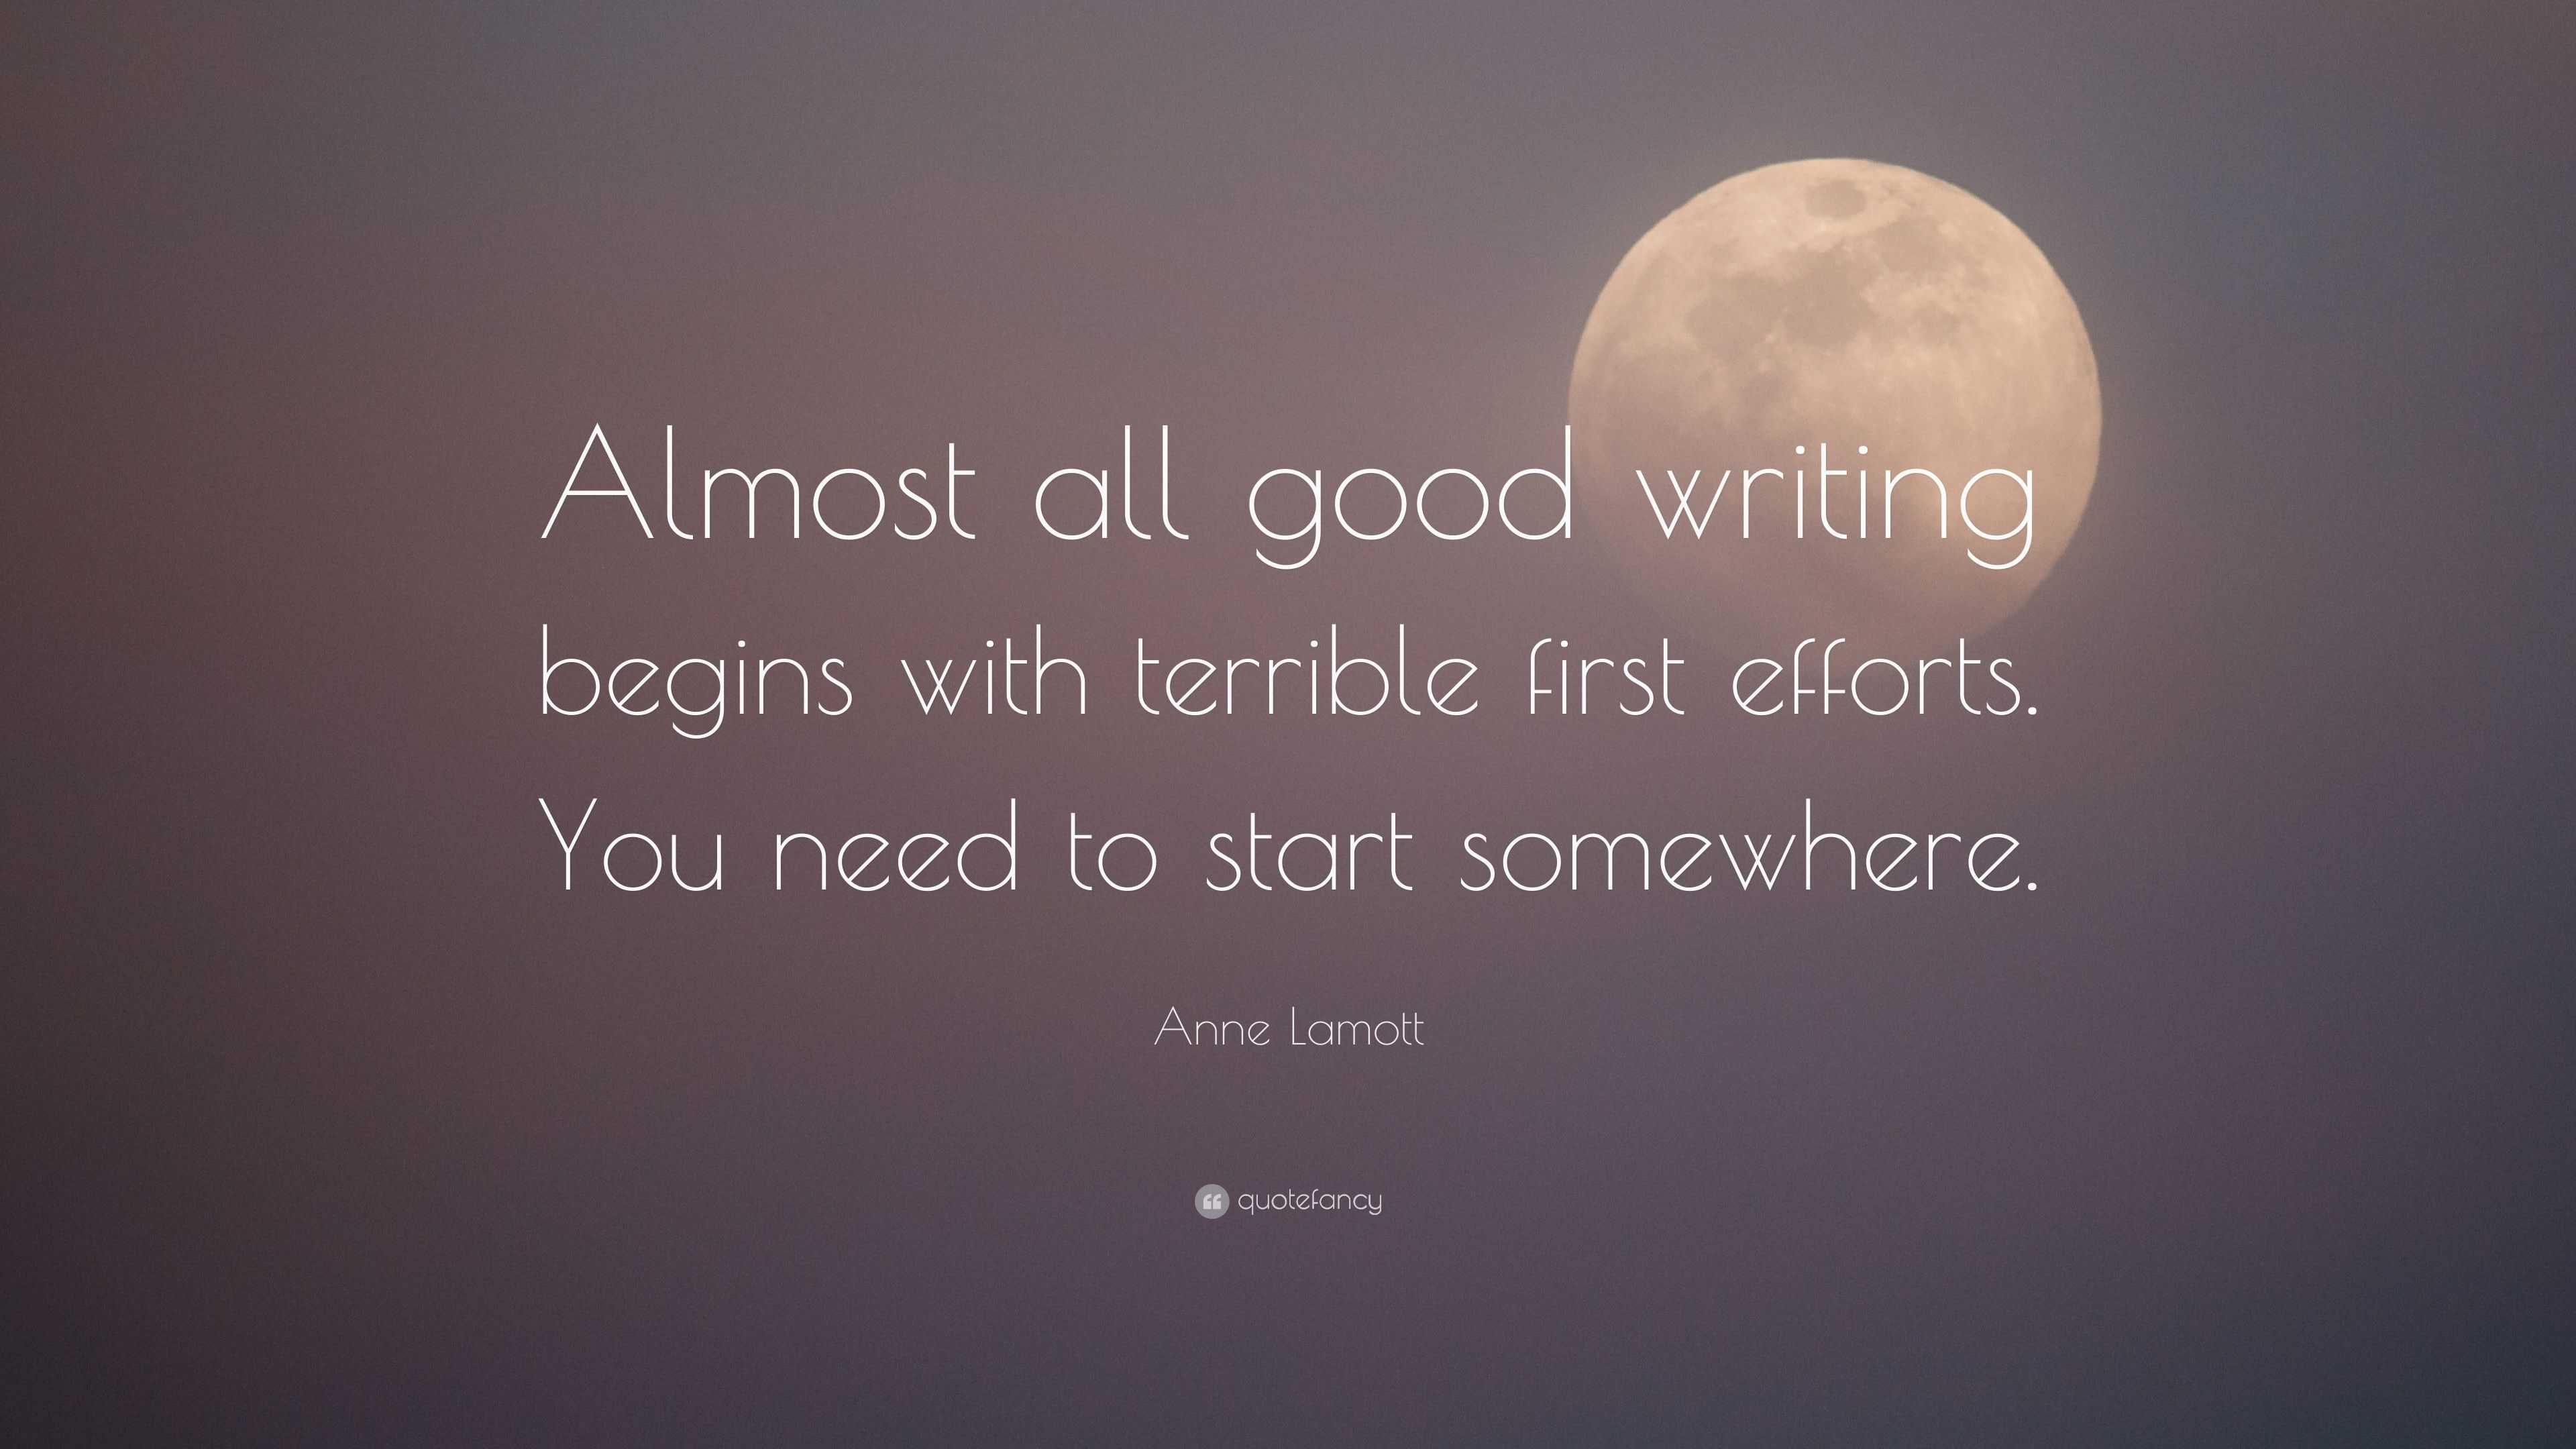 4897786 Anne Lamott Quote Almost all good writing begins with terrible